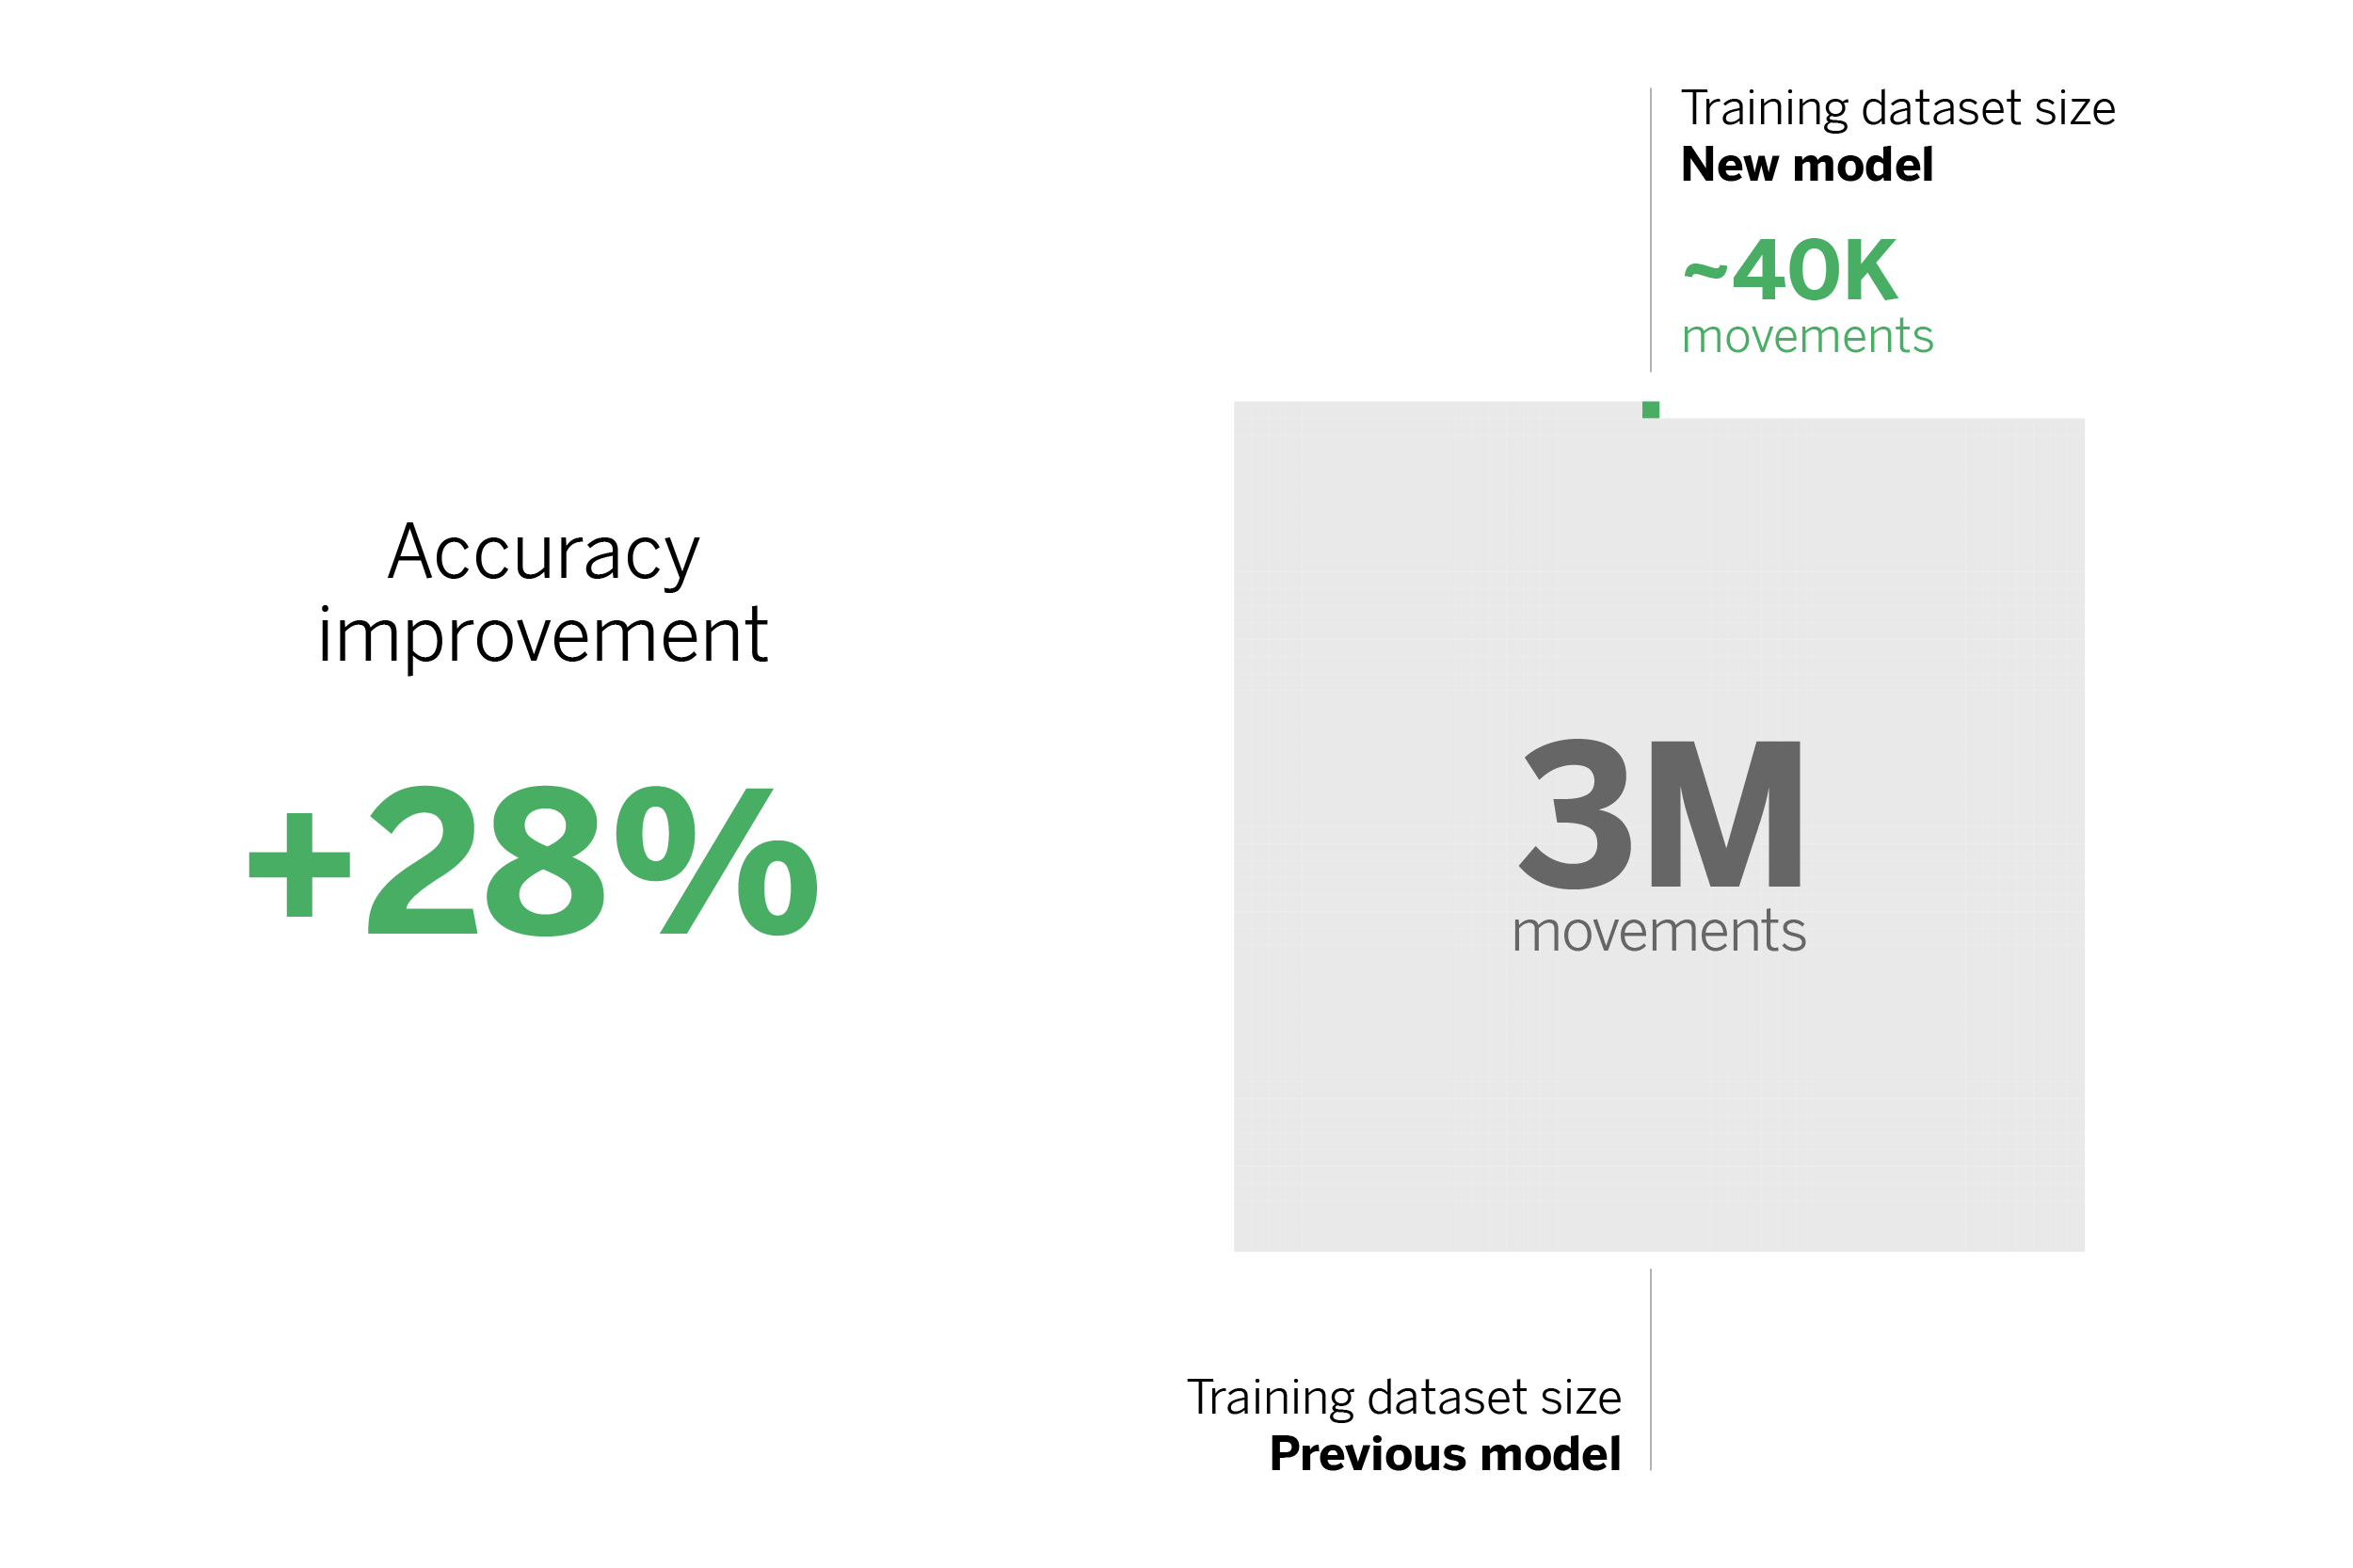 With the current model, we were able to improve accuracy by 28%, while reducing the number of labeled transactions required to train the model by more than 98%